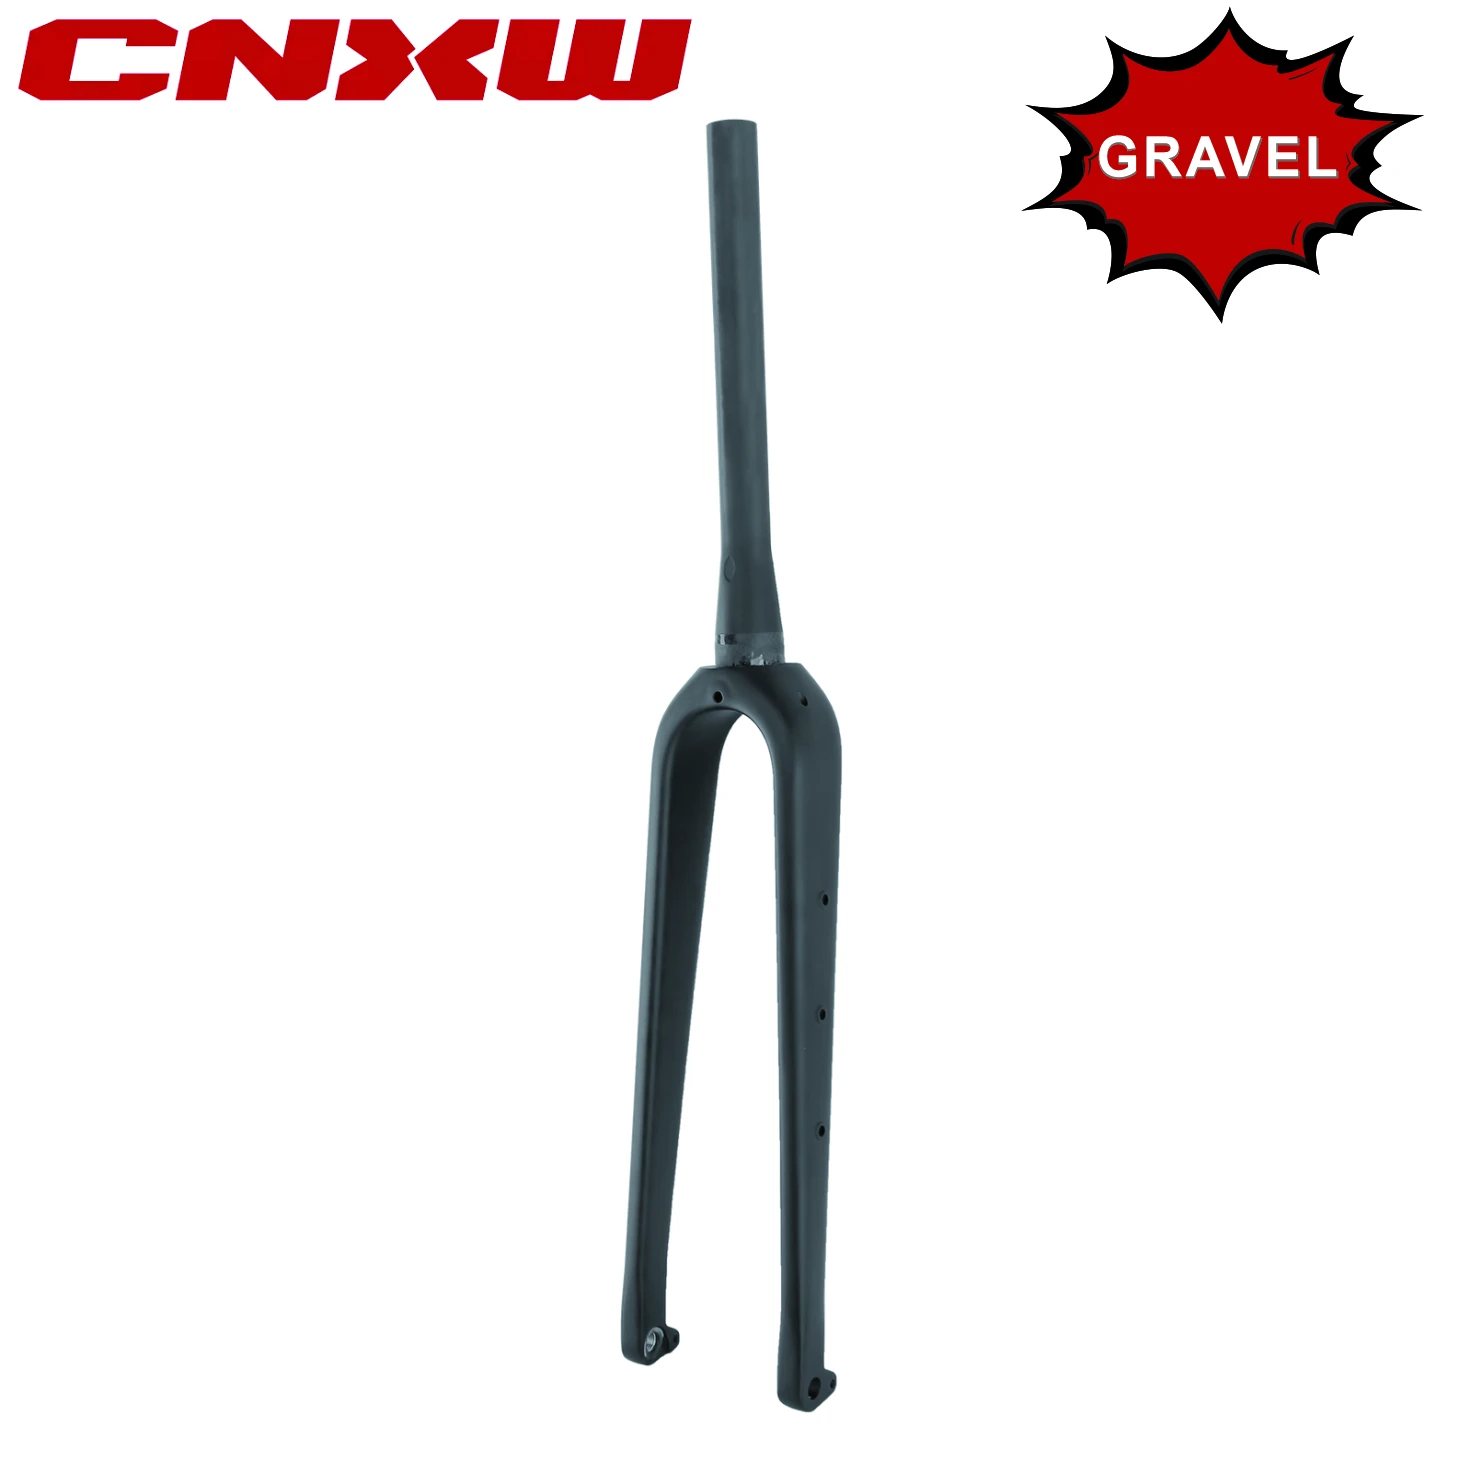 New Carbon Gravel Fork 700C Disc Brake Max Tire 700*45C Or 27.5*2.1inch Internal Cable External Cable MTB Road Bicycle Fork